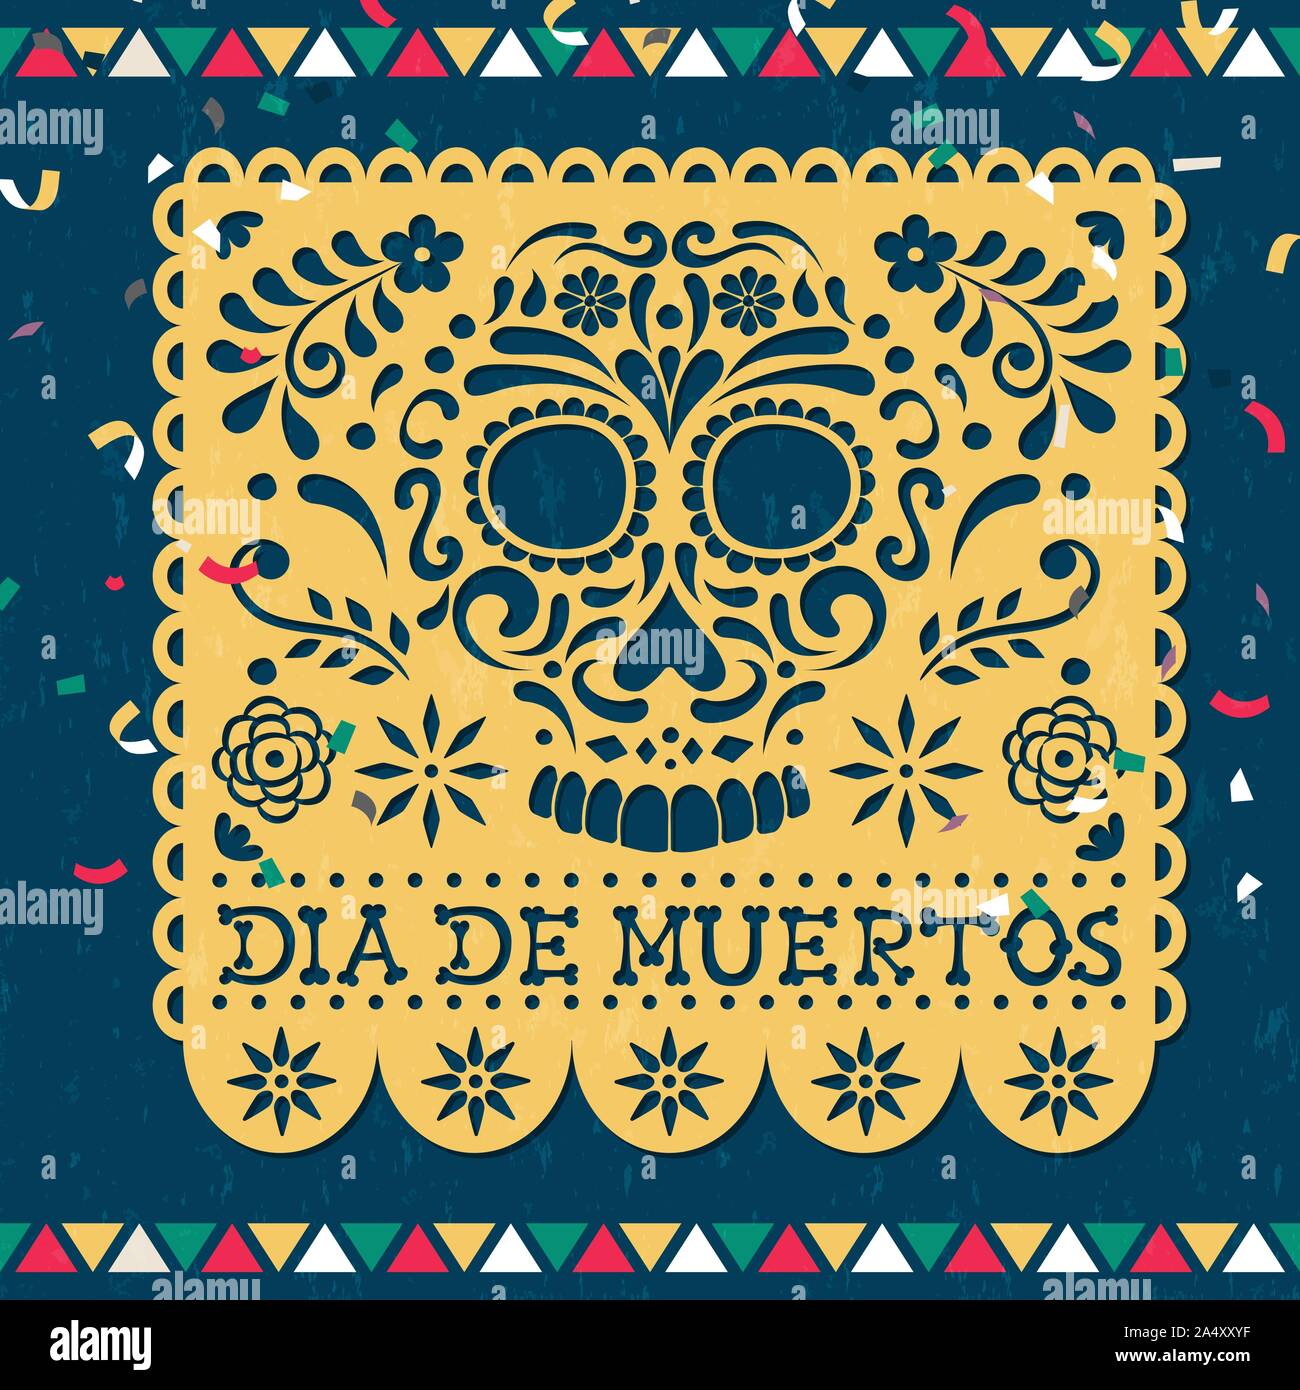 Day of the dead greeting card for mexican celebration, traditional mexico papercut banner decoration with colorful skulls and party confetti. Stock Vector